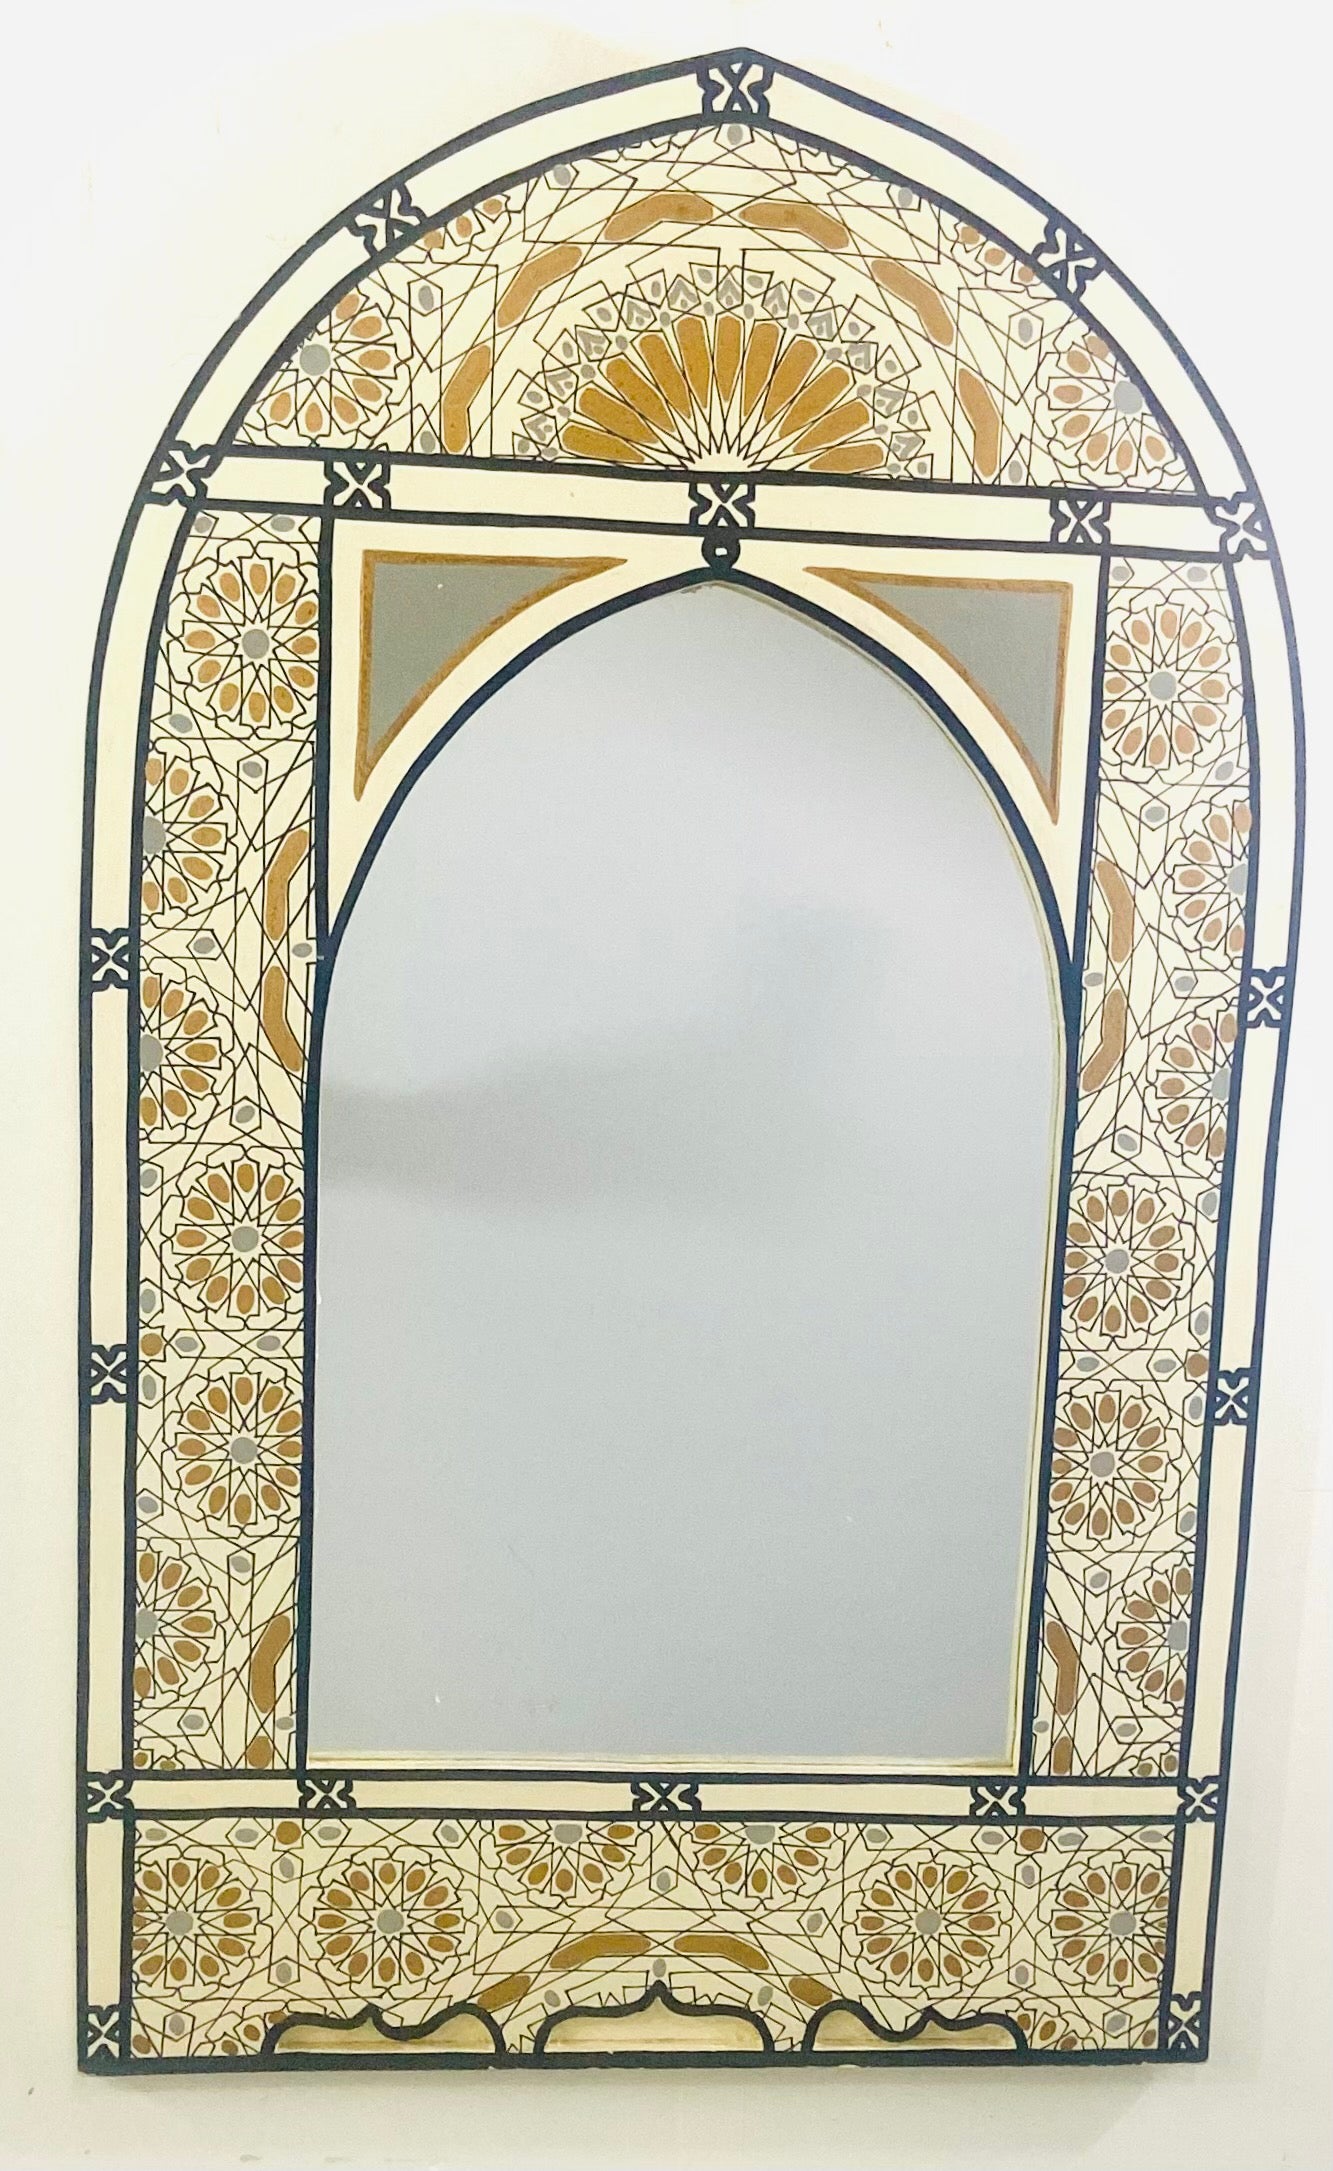 A beautiful Bohemian style Moroccan wall, table or vanity mirror. The mirror frame is hand carved in a timeless Moorish arch shape and artistically hand-painted to feature intricate Moorish geometrical designs in blue gray, black and gold. The